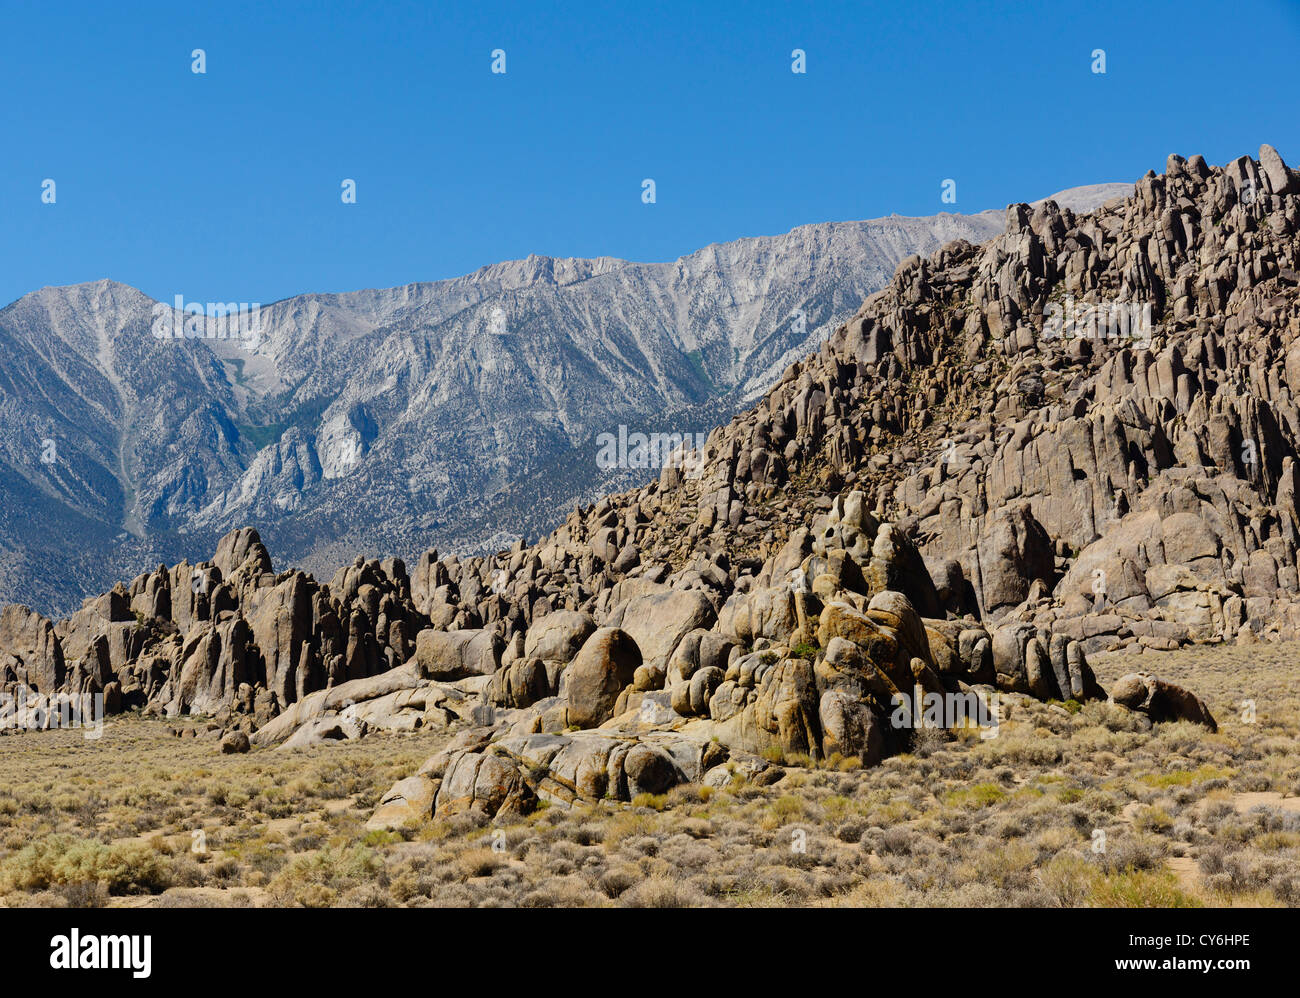 Movie Drive, Alabama Hills, Lone Pine, in Owens Valley of Western Sierras on Route 395. Stock Photo